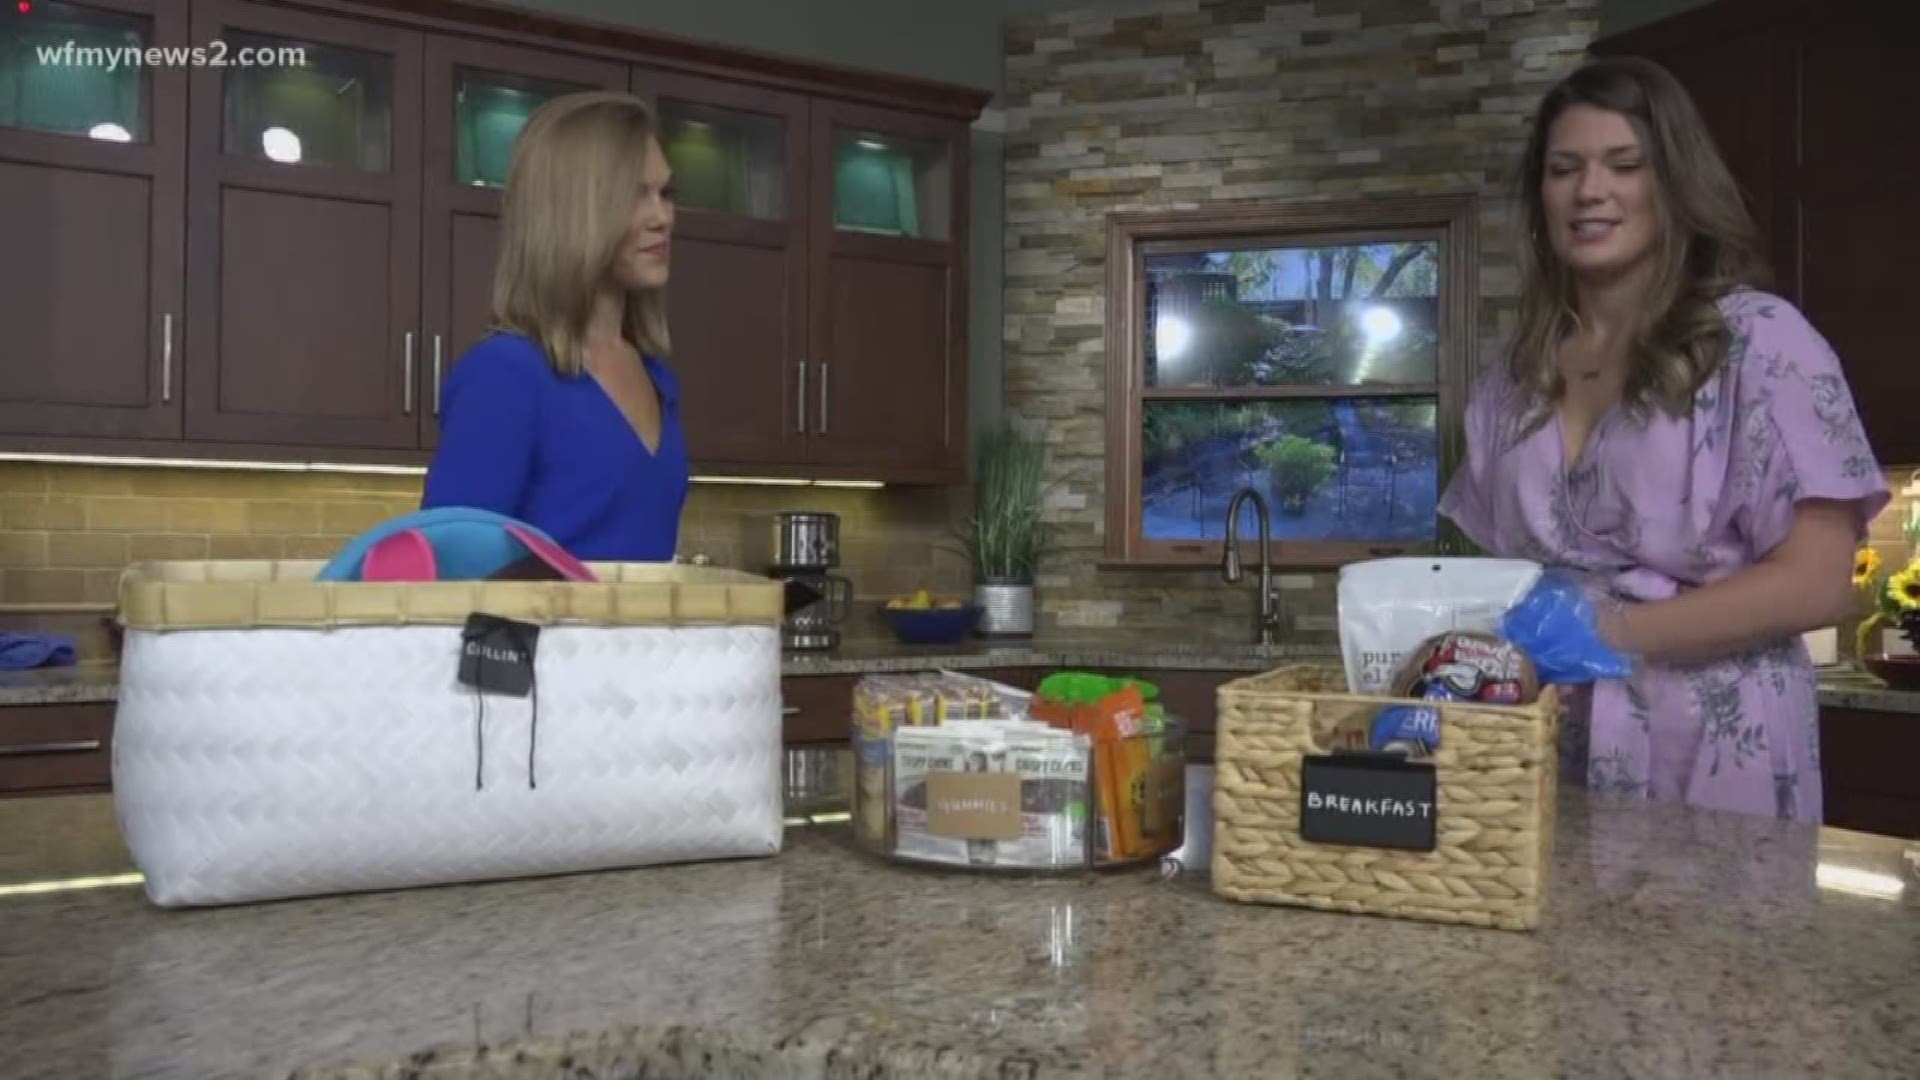 When you have kids their stuff seems to grow and multiply all over your house. Neat Method of Winston-Salem is helping us clean it up and organize it! Plus, some pantry hacks to keep your kitchen moving.